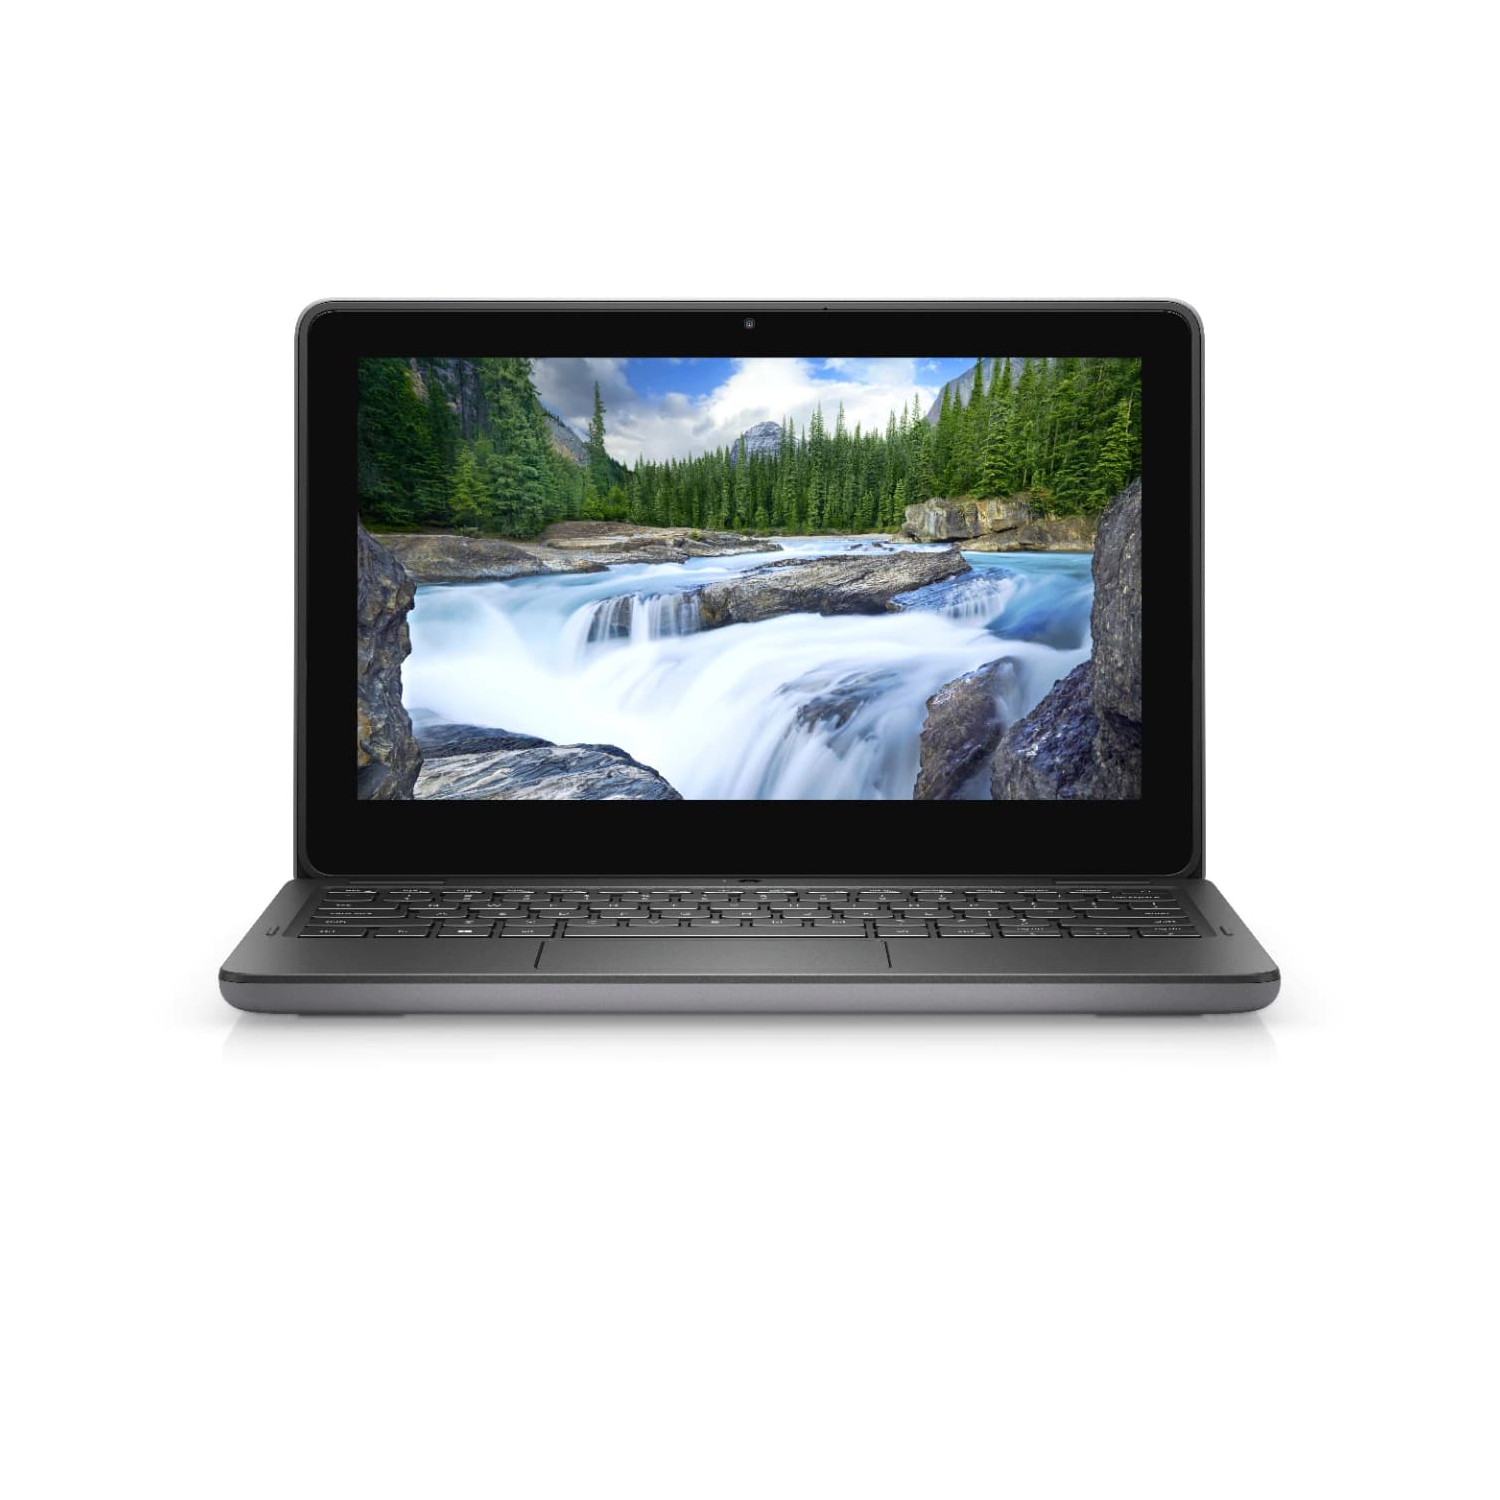 Refurbished (Excellent) - Dell Latitude 3000 3120 Laptop (2021) | 11.6" HD | Core Pentium - 128GB SSD - 8GB RAM | 4 Cores @ 3.3 GHz Certified Refurbished